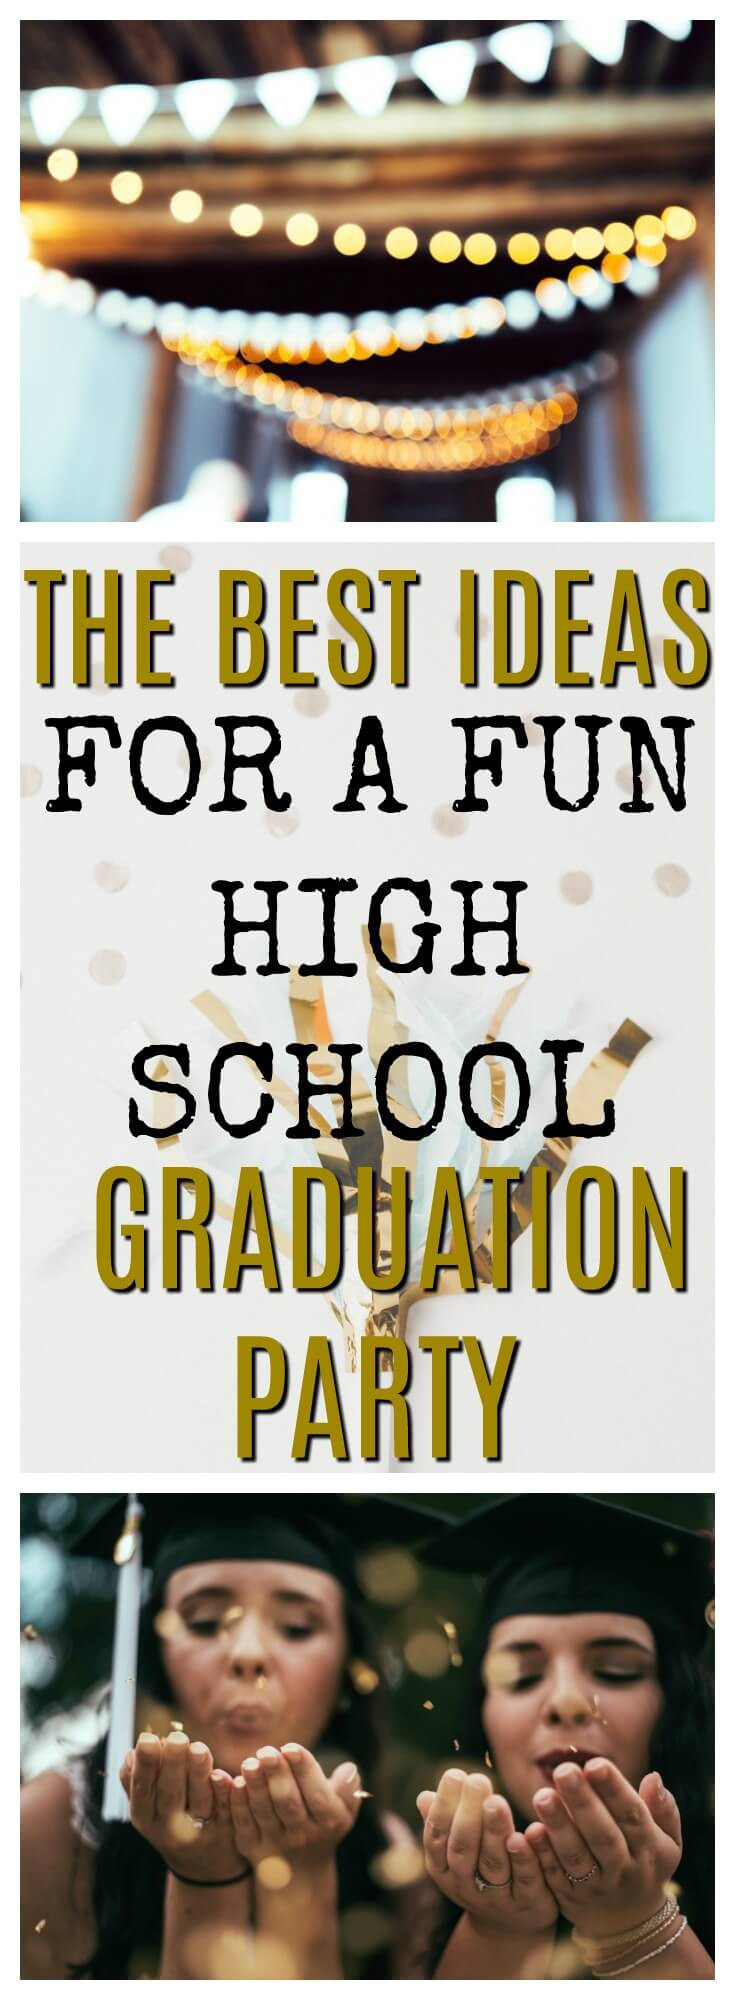 Fun College Graduation Party Ideas
 Graduation Party Ideas 2019 How to Celebrate [step by step]